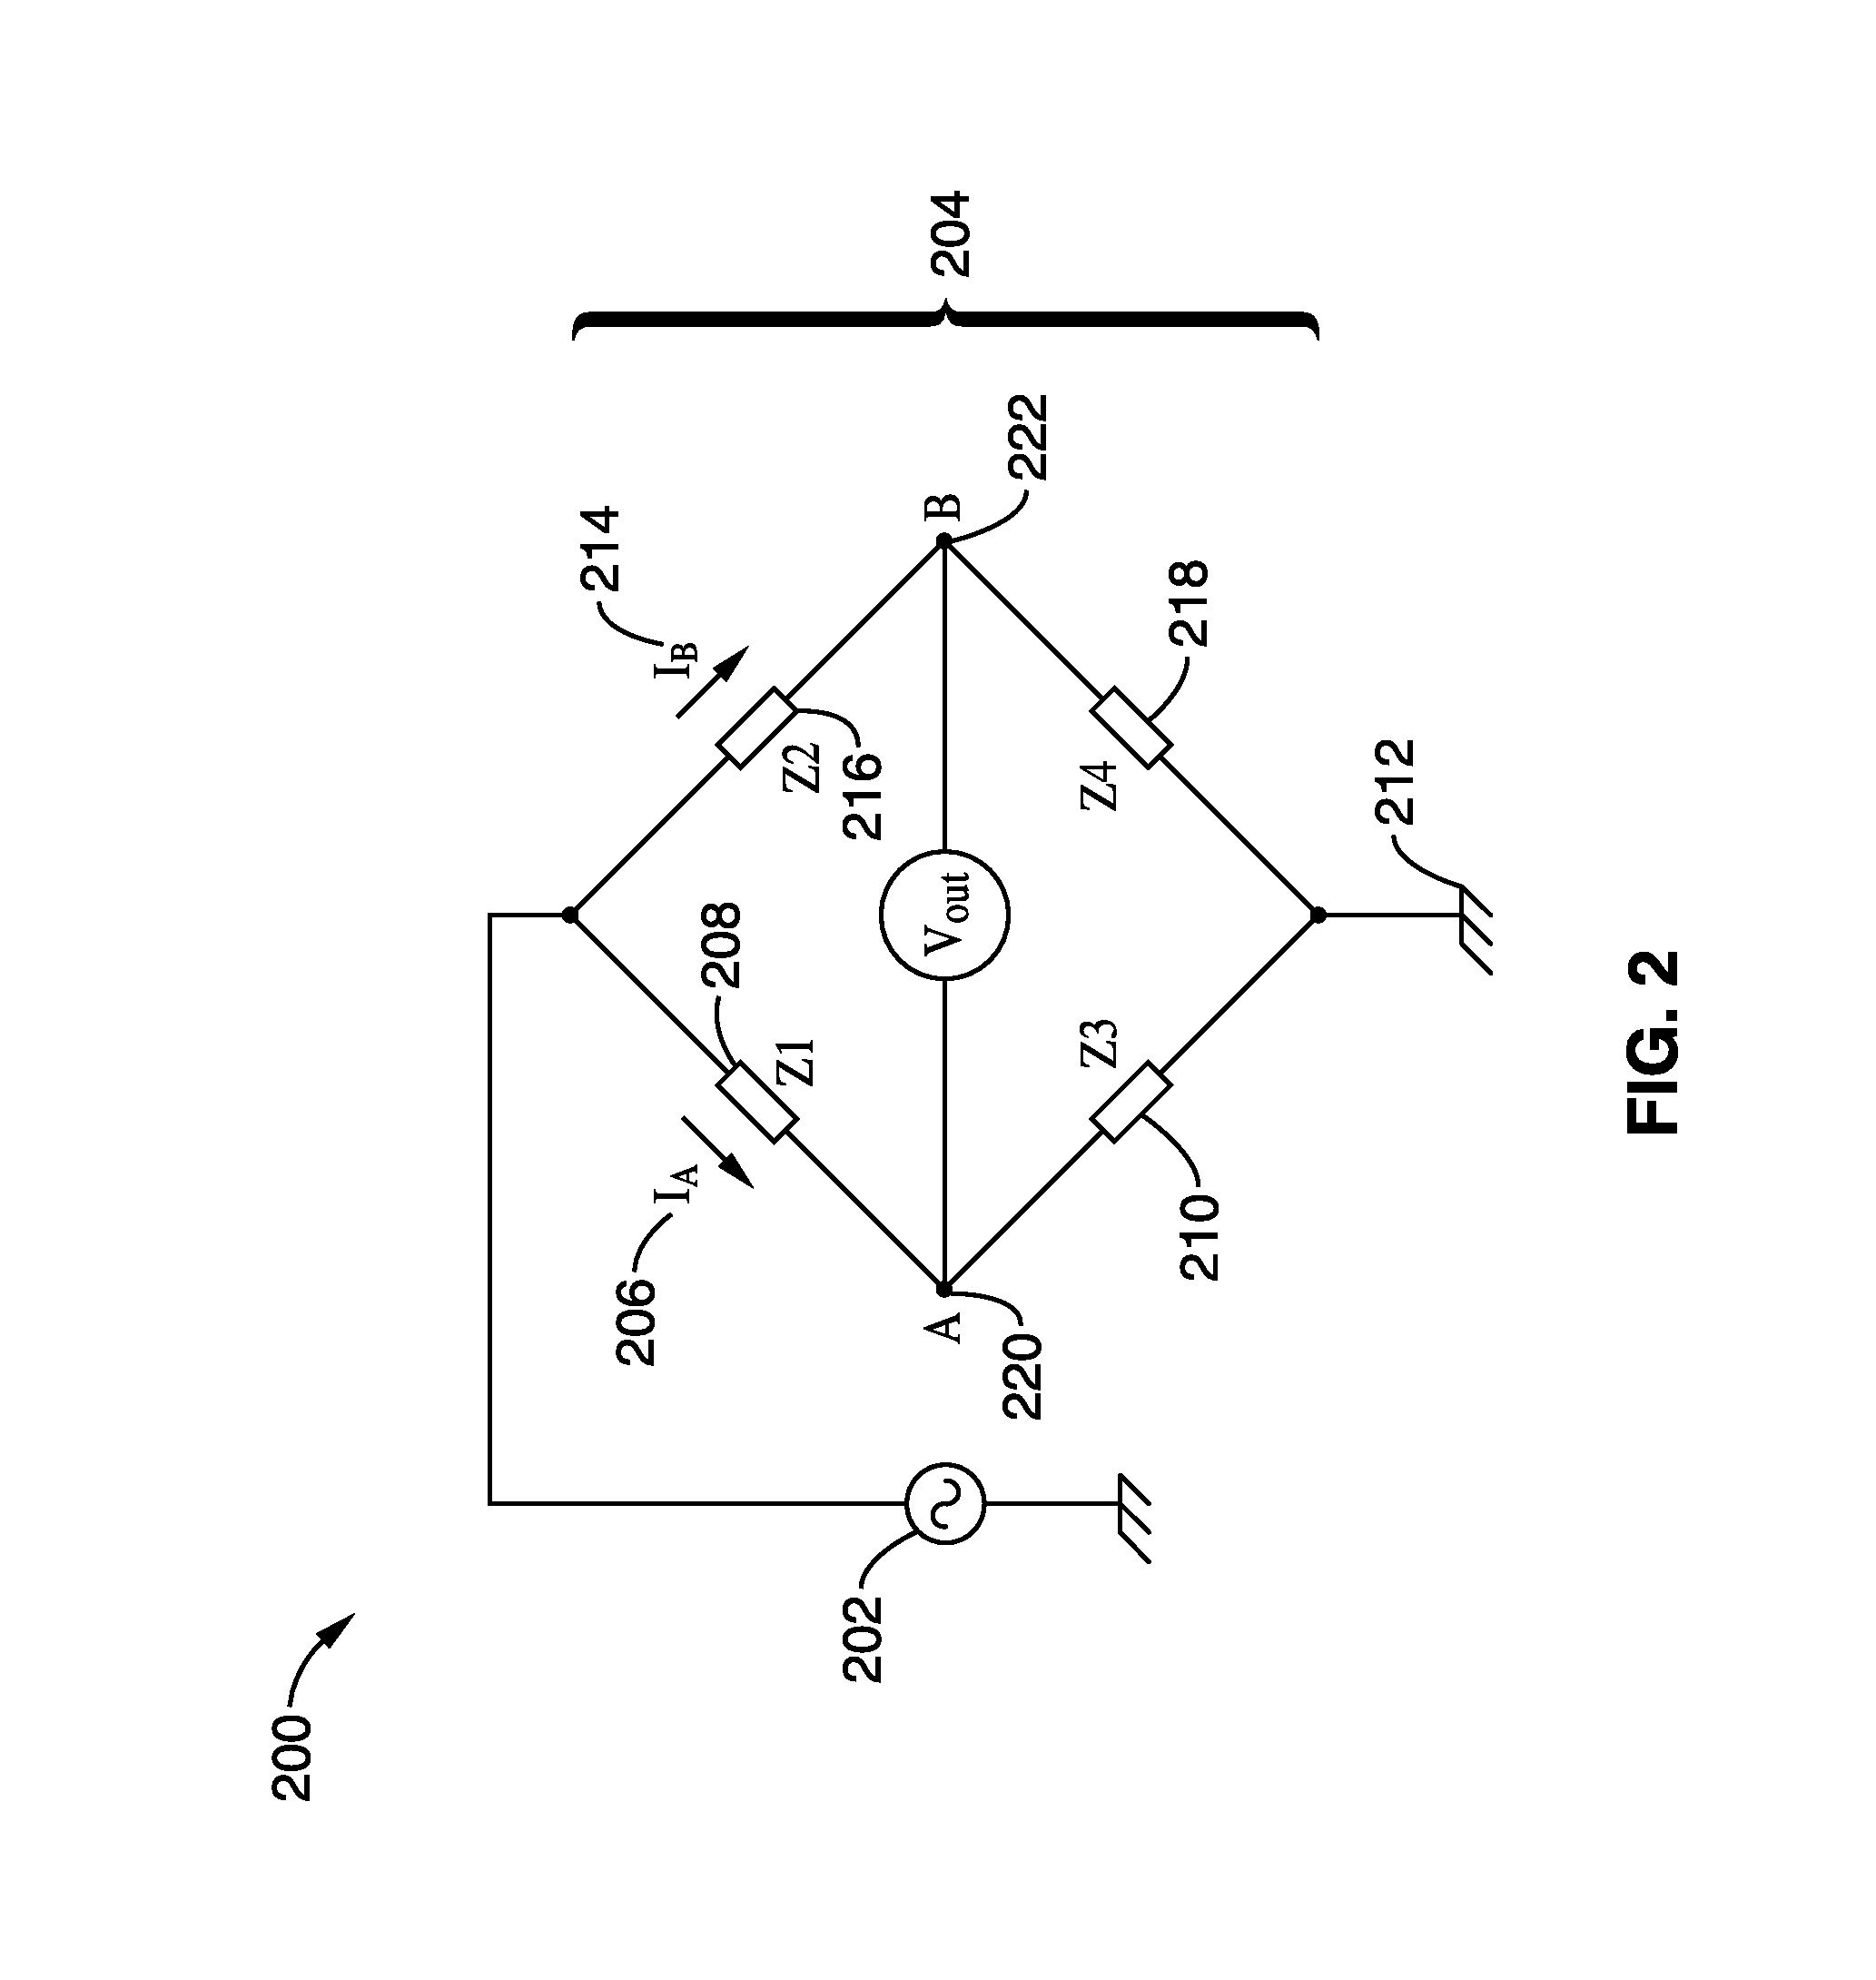 Structural health monitoring circuit